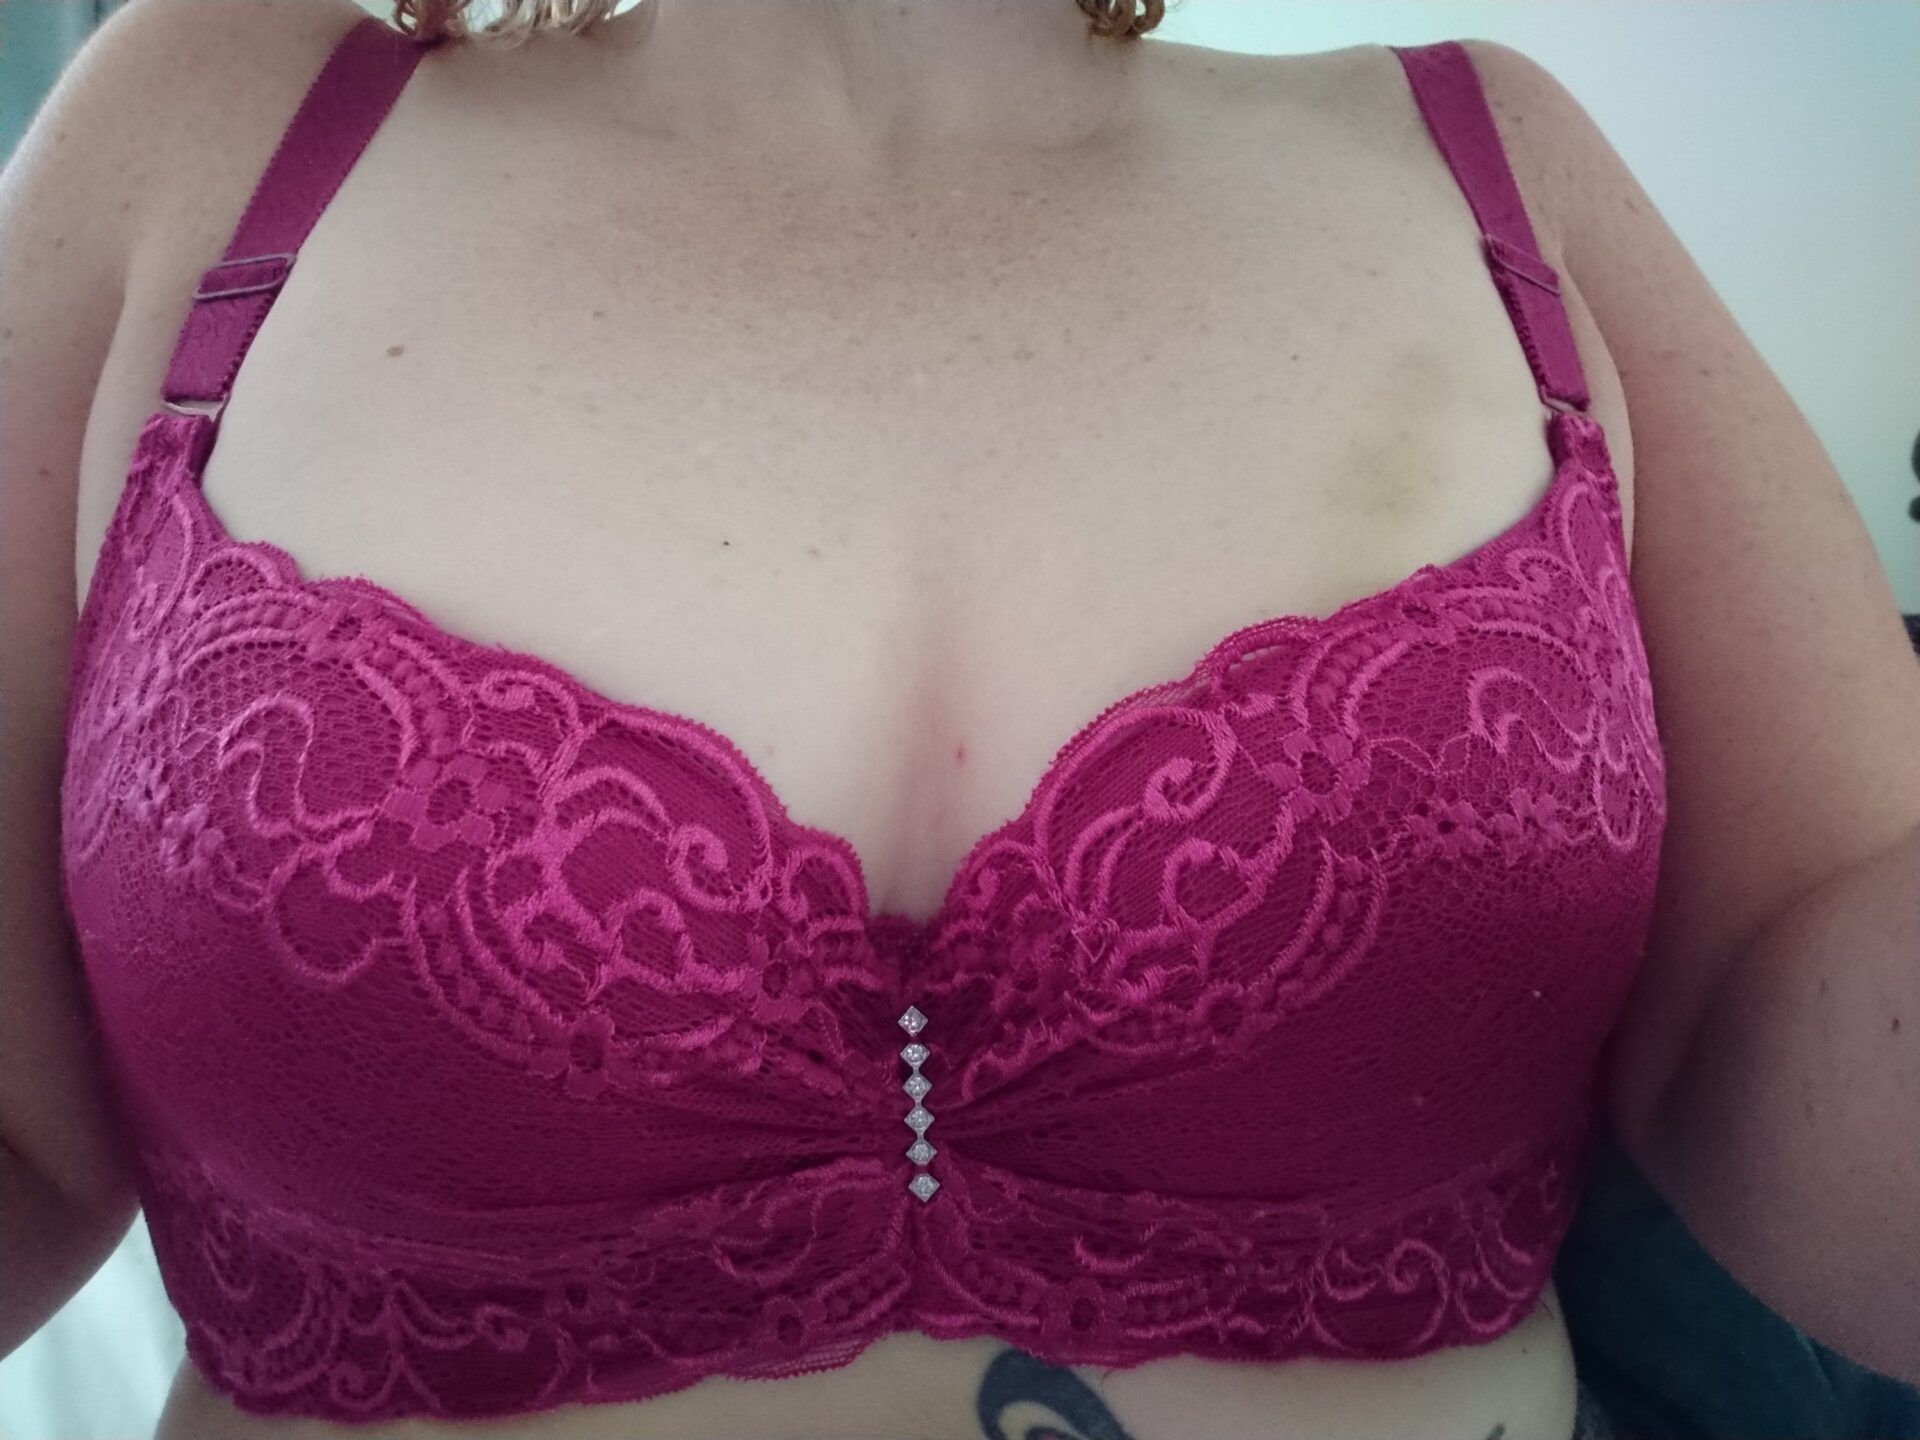 Lady wearing a cerise lacy bra, Framed by the fabric are traces of finger print bruises on her left breast